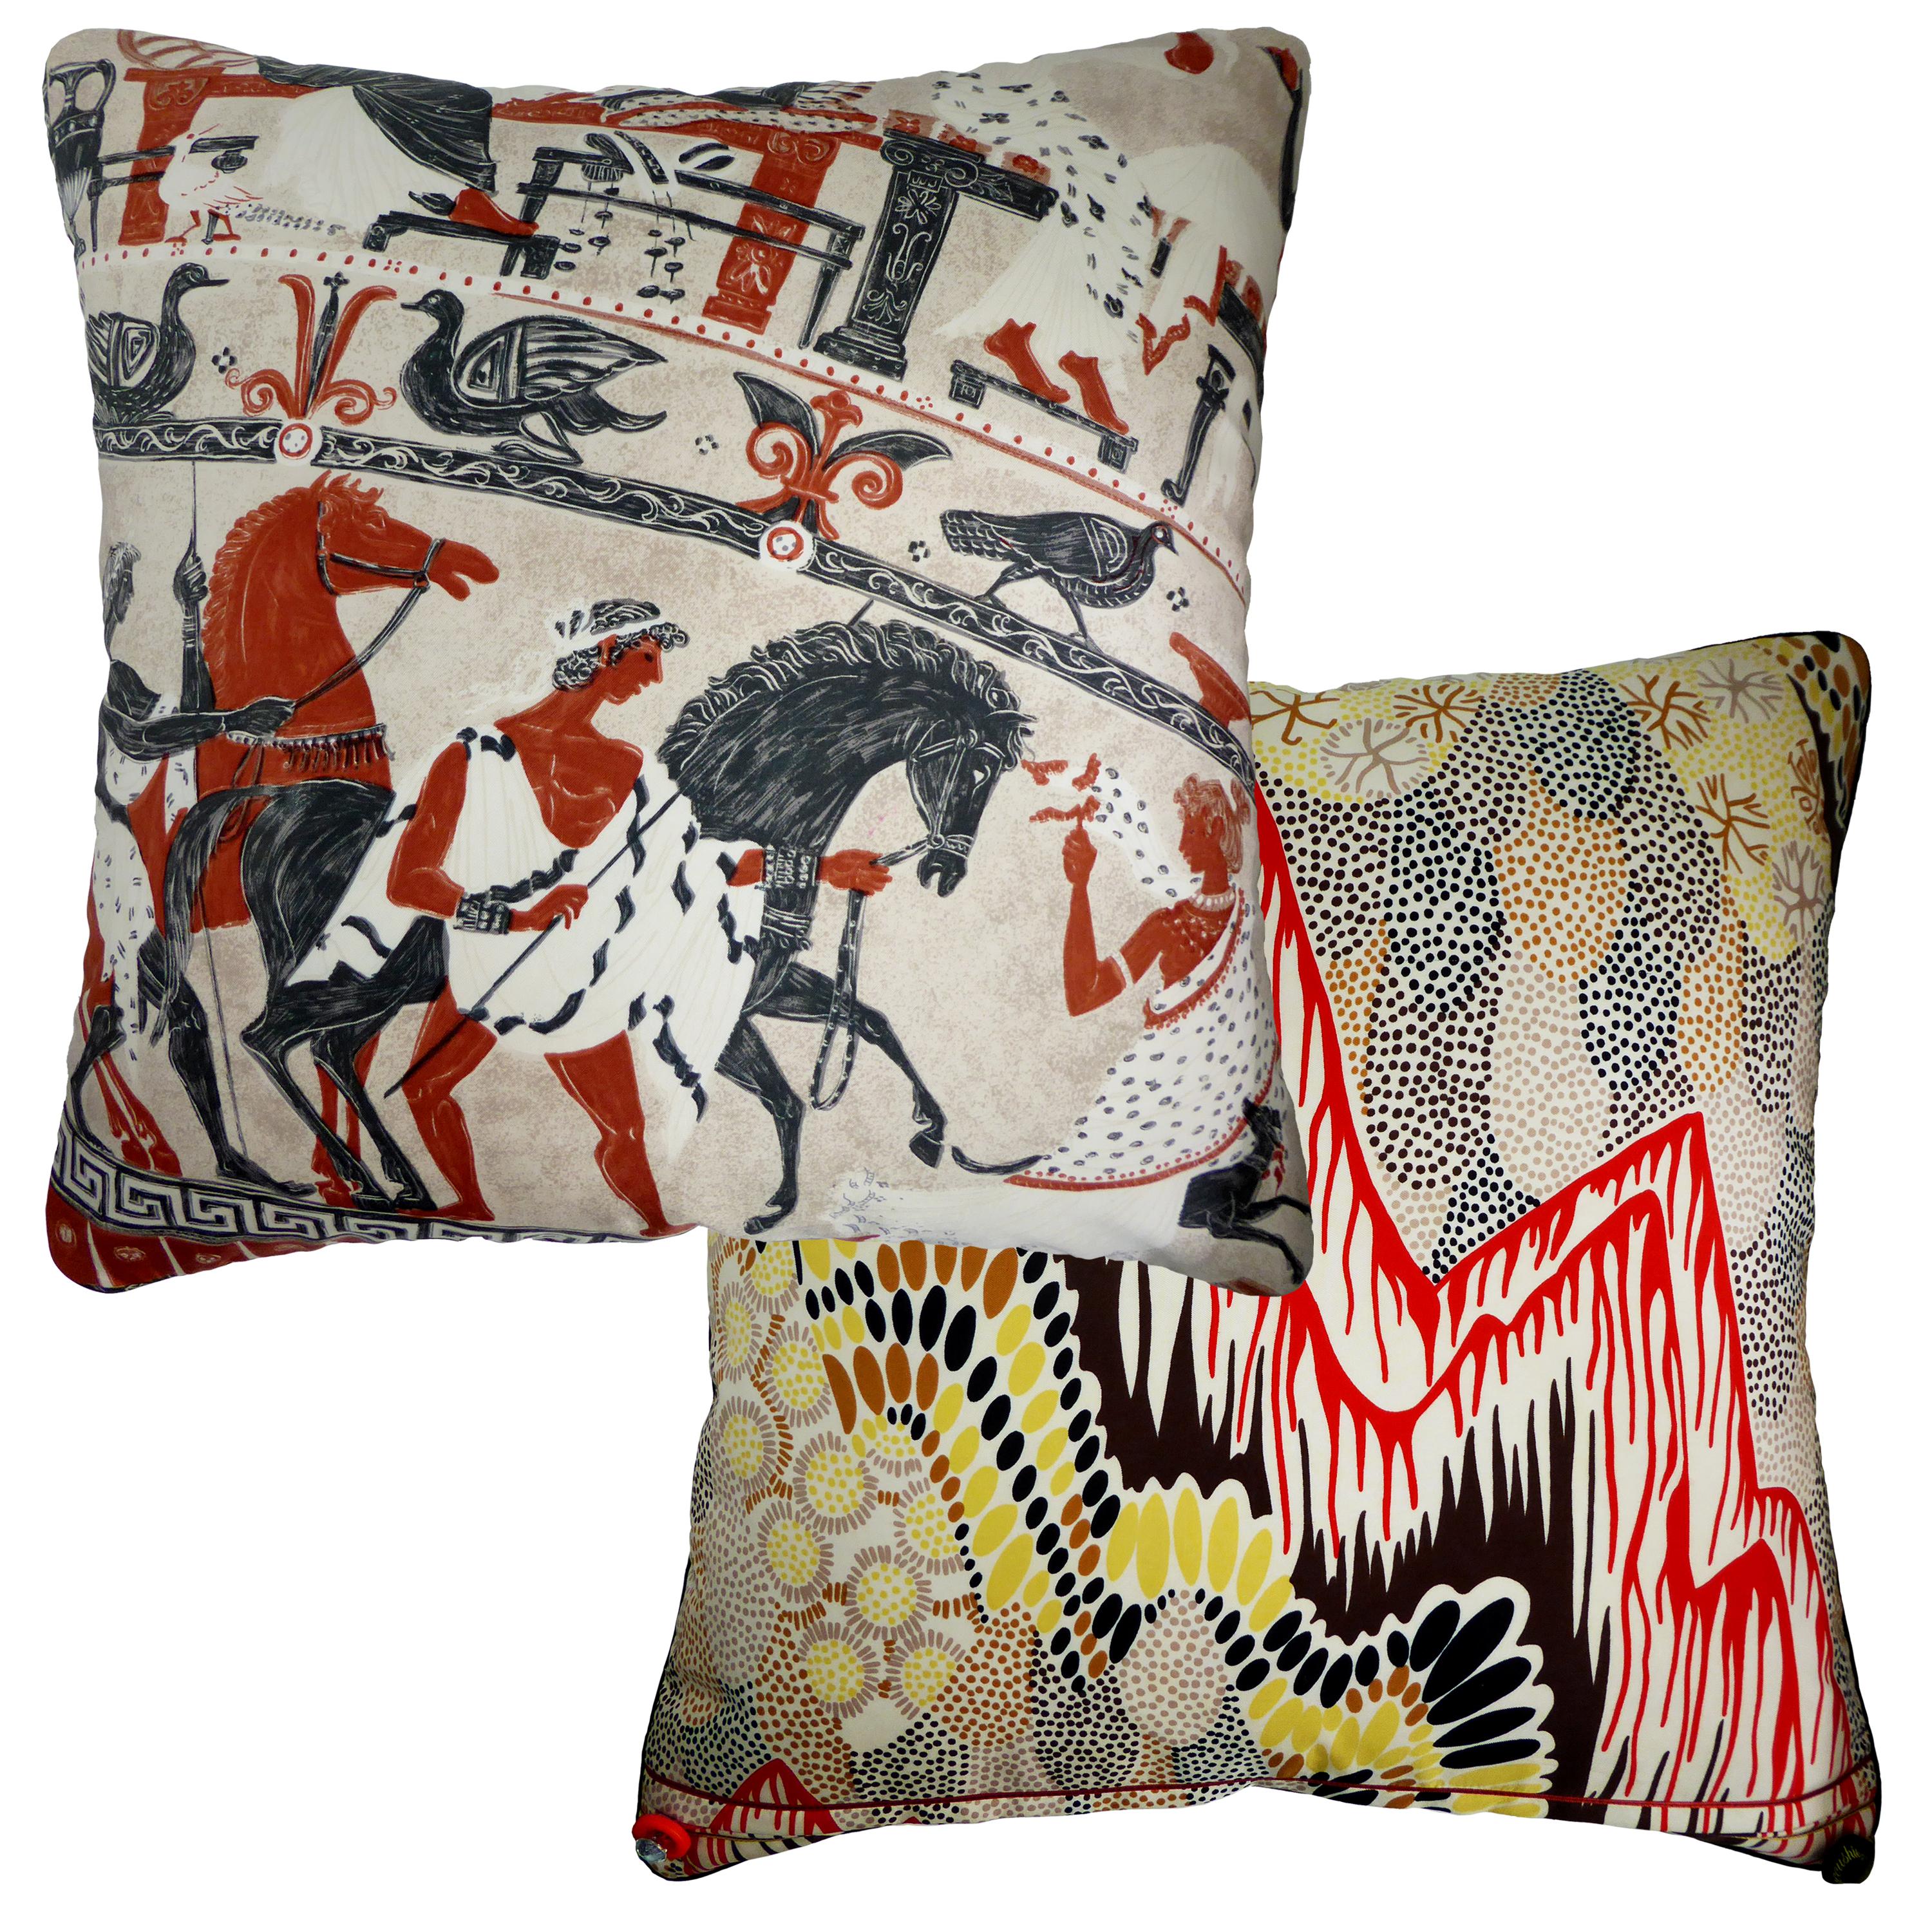 Vintage cushions, mythology,
circa 1960 & 1970
British made luxury cushion created by using original vintage silks featuring two beautiful and complimentary sides
Provenance; Britain
Made by Nichollette Yardley-Moore
Silk with complete interfacing